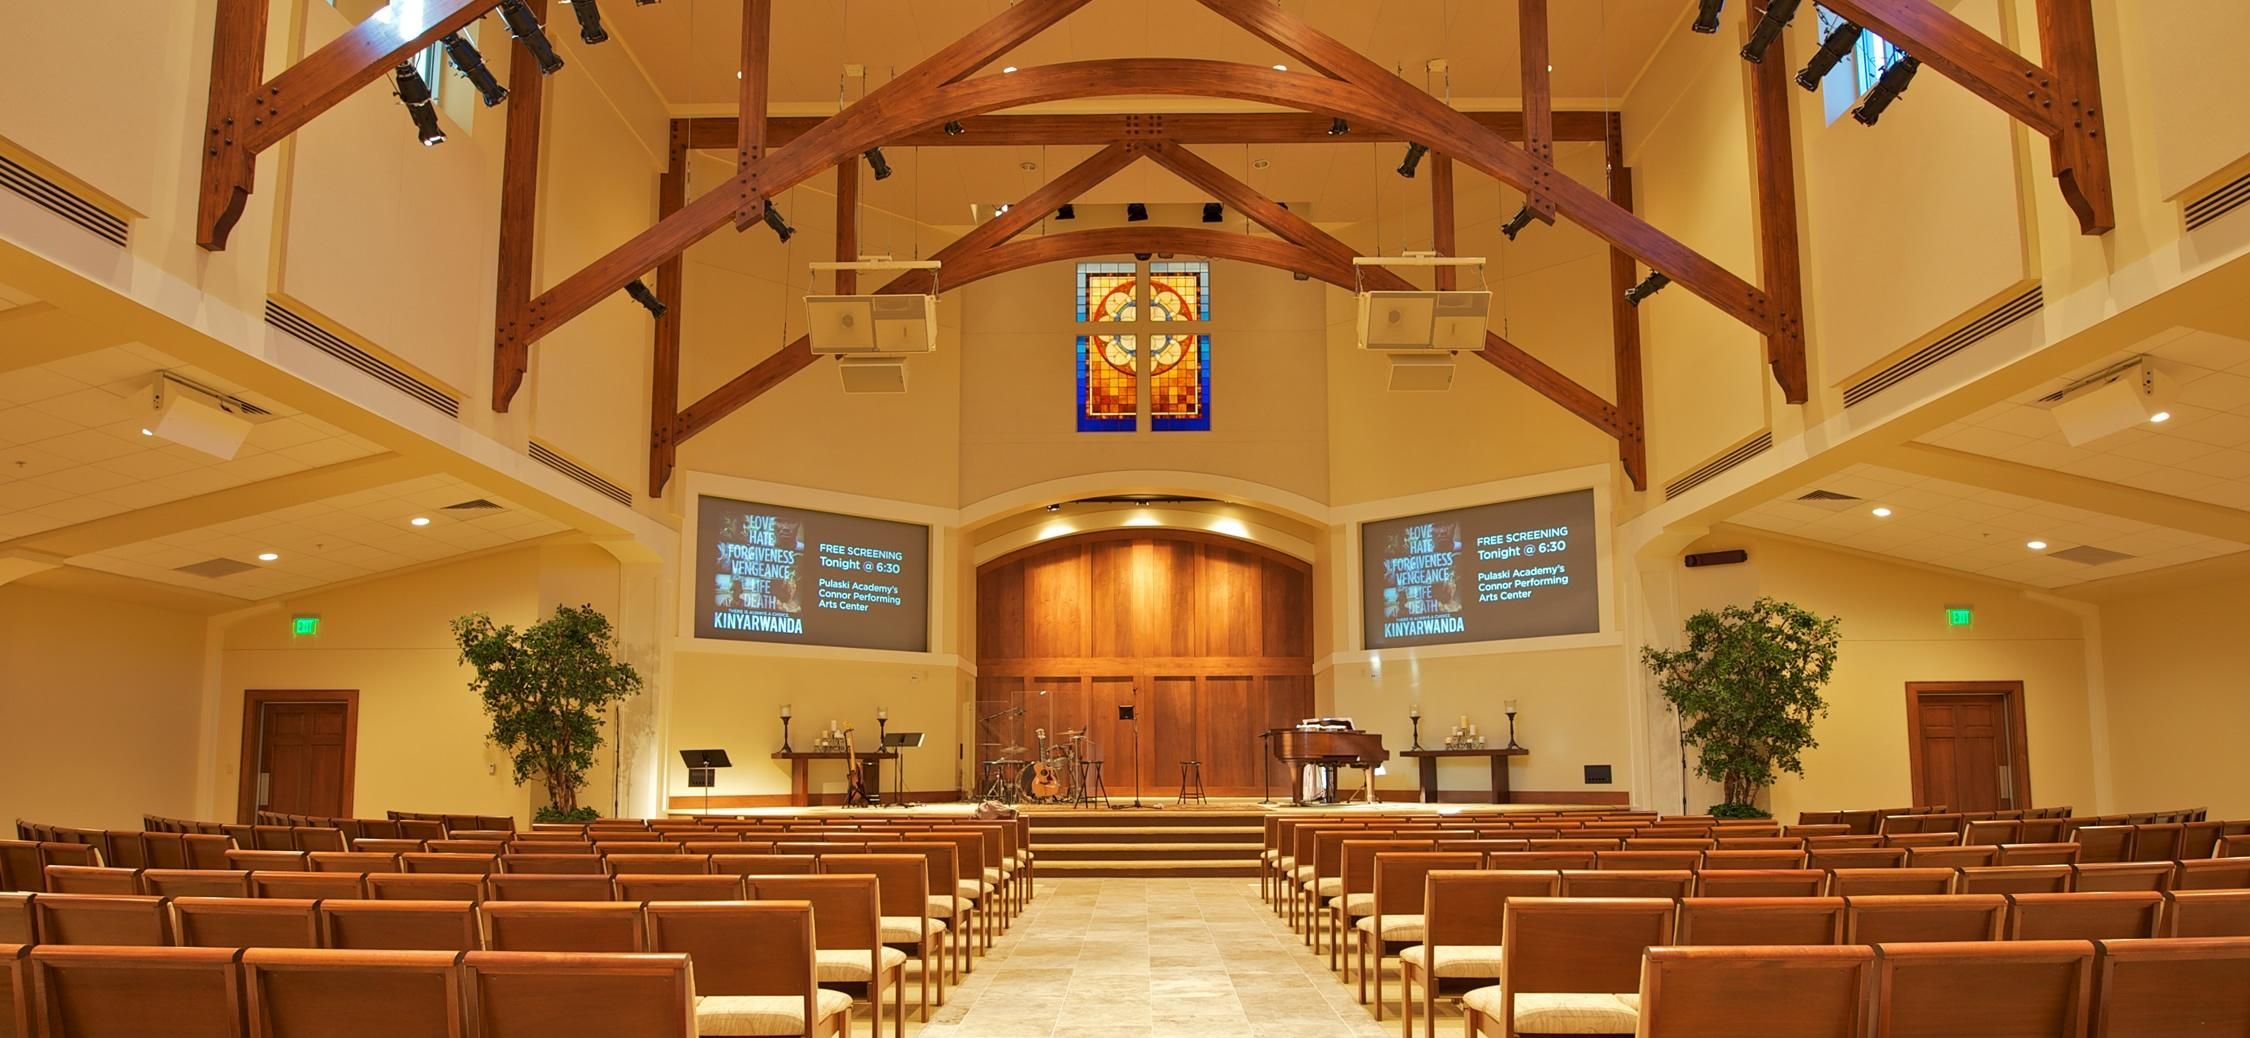 warm toned image of a church meeting hall